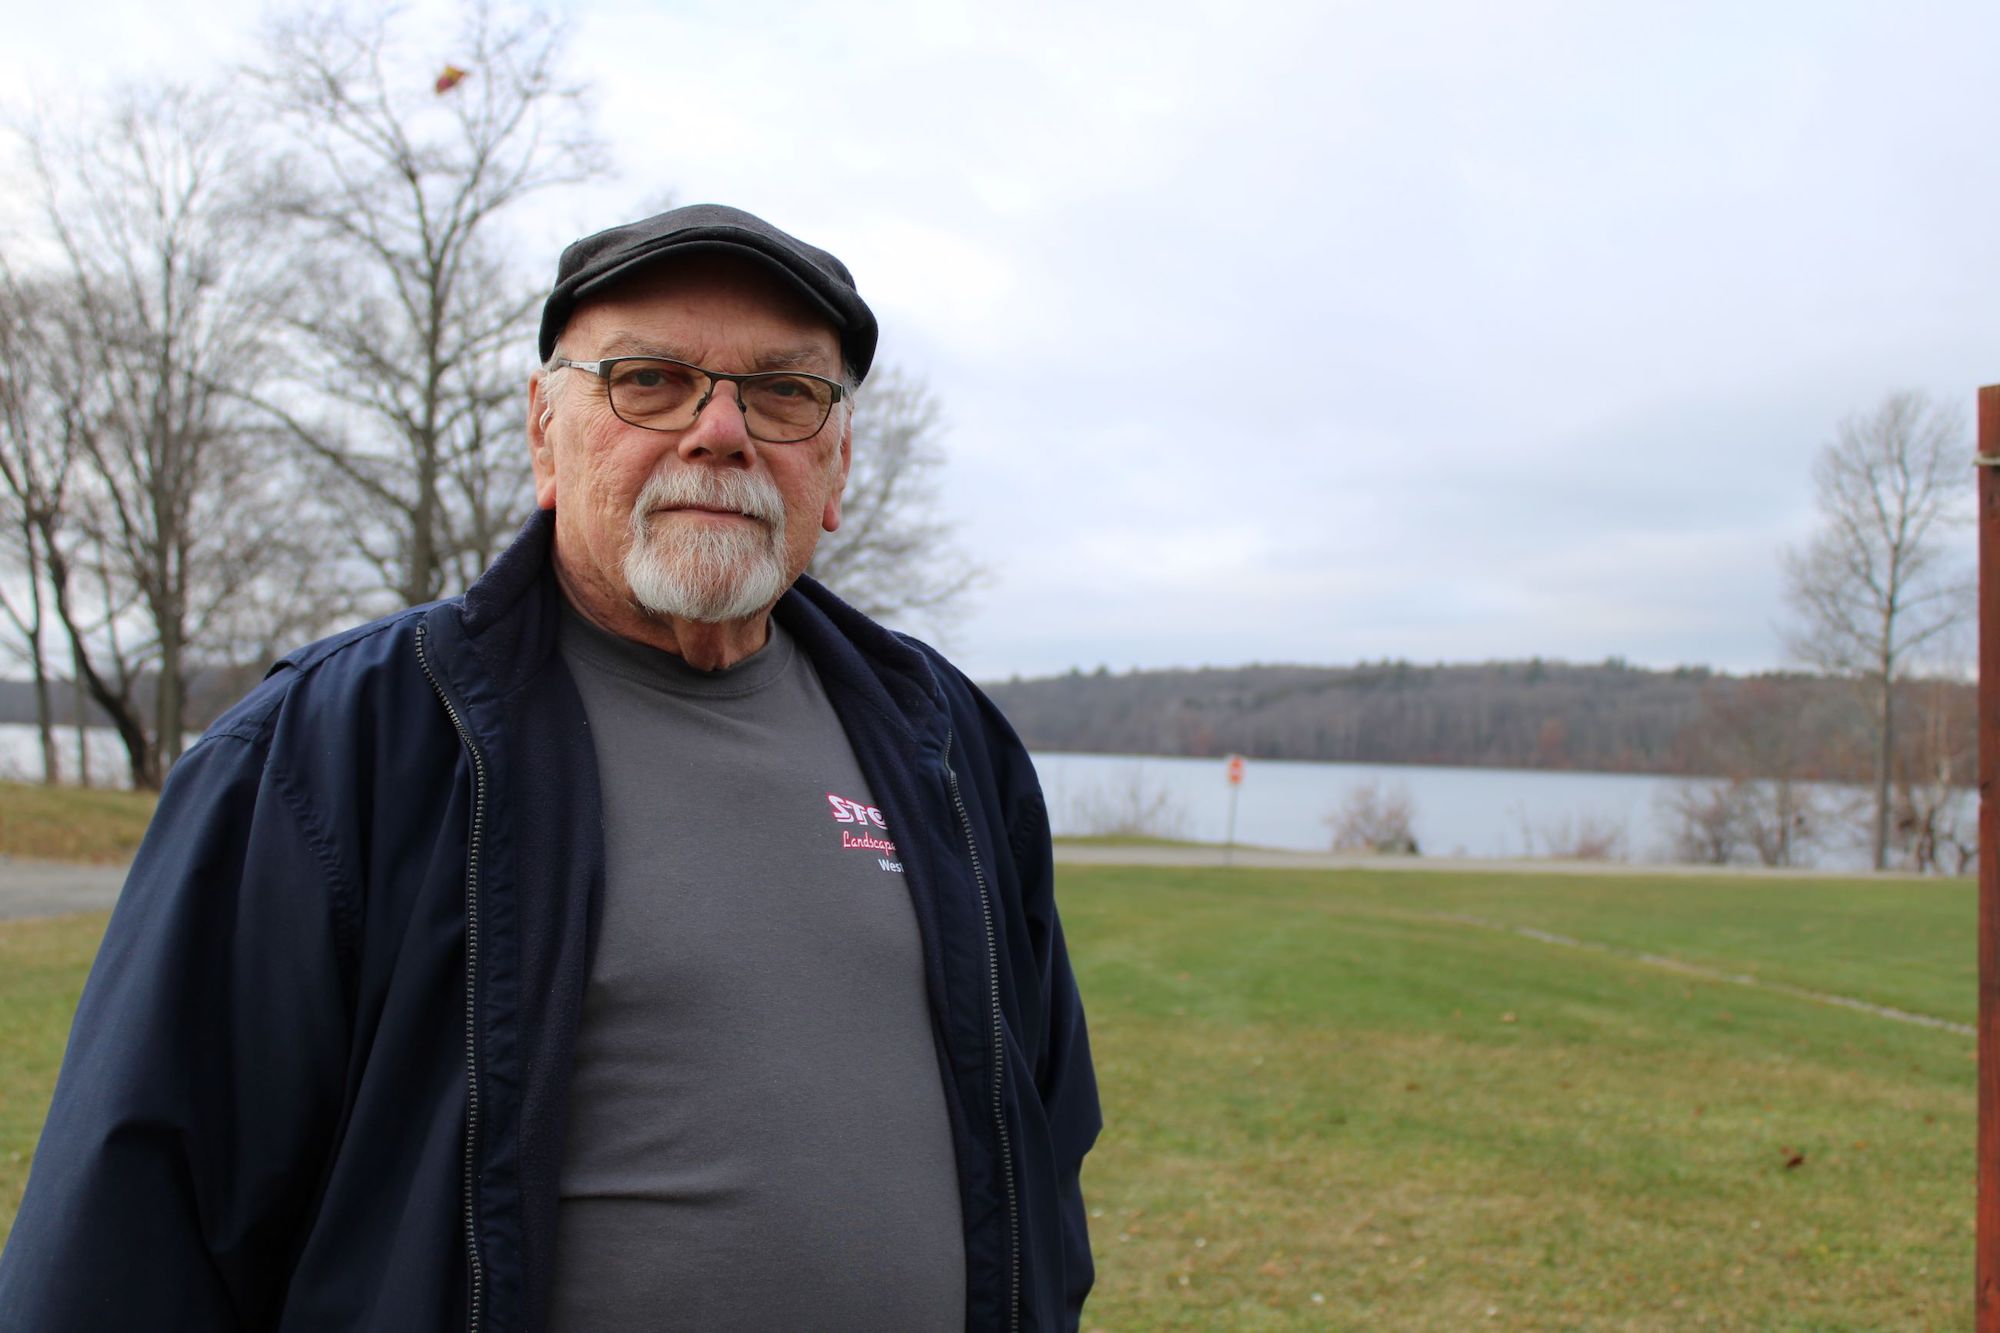 Fields at Chauncy Lake named after Earl Storey